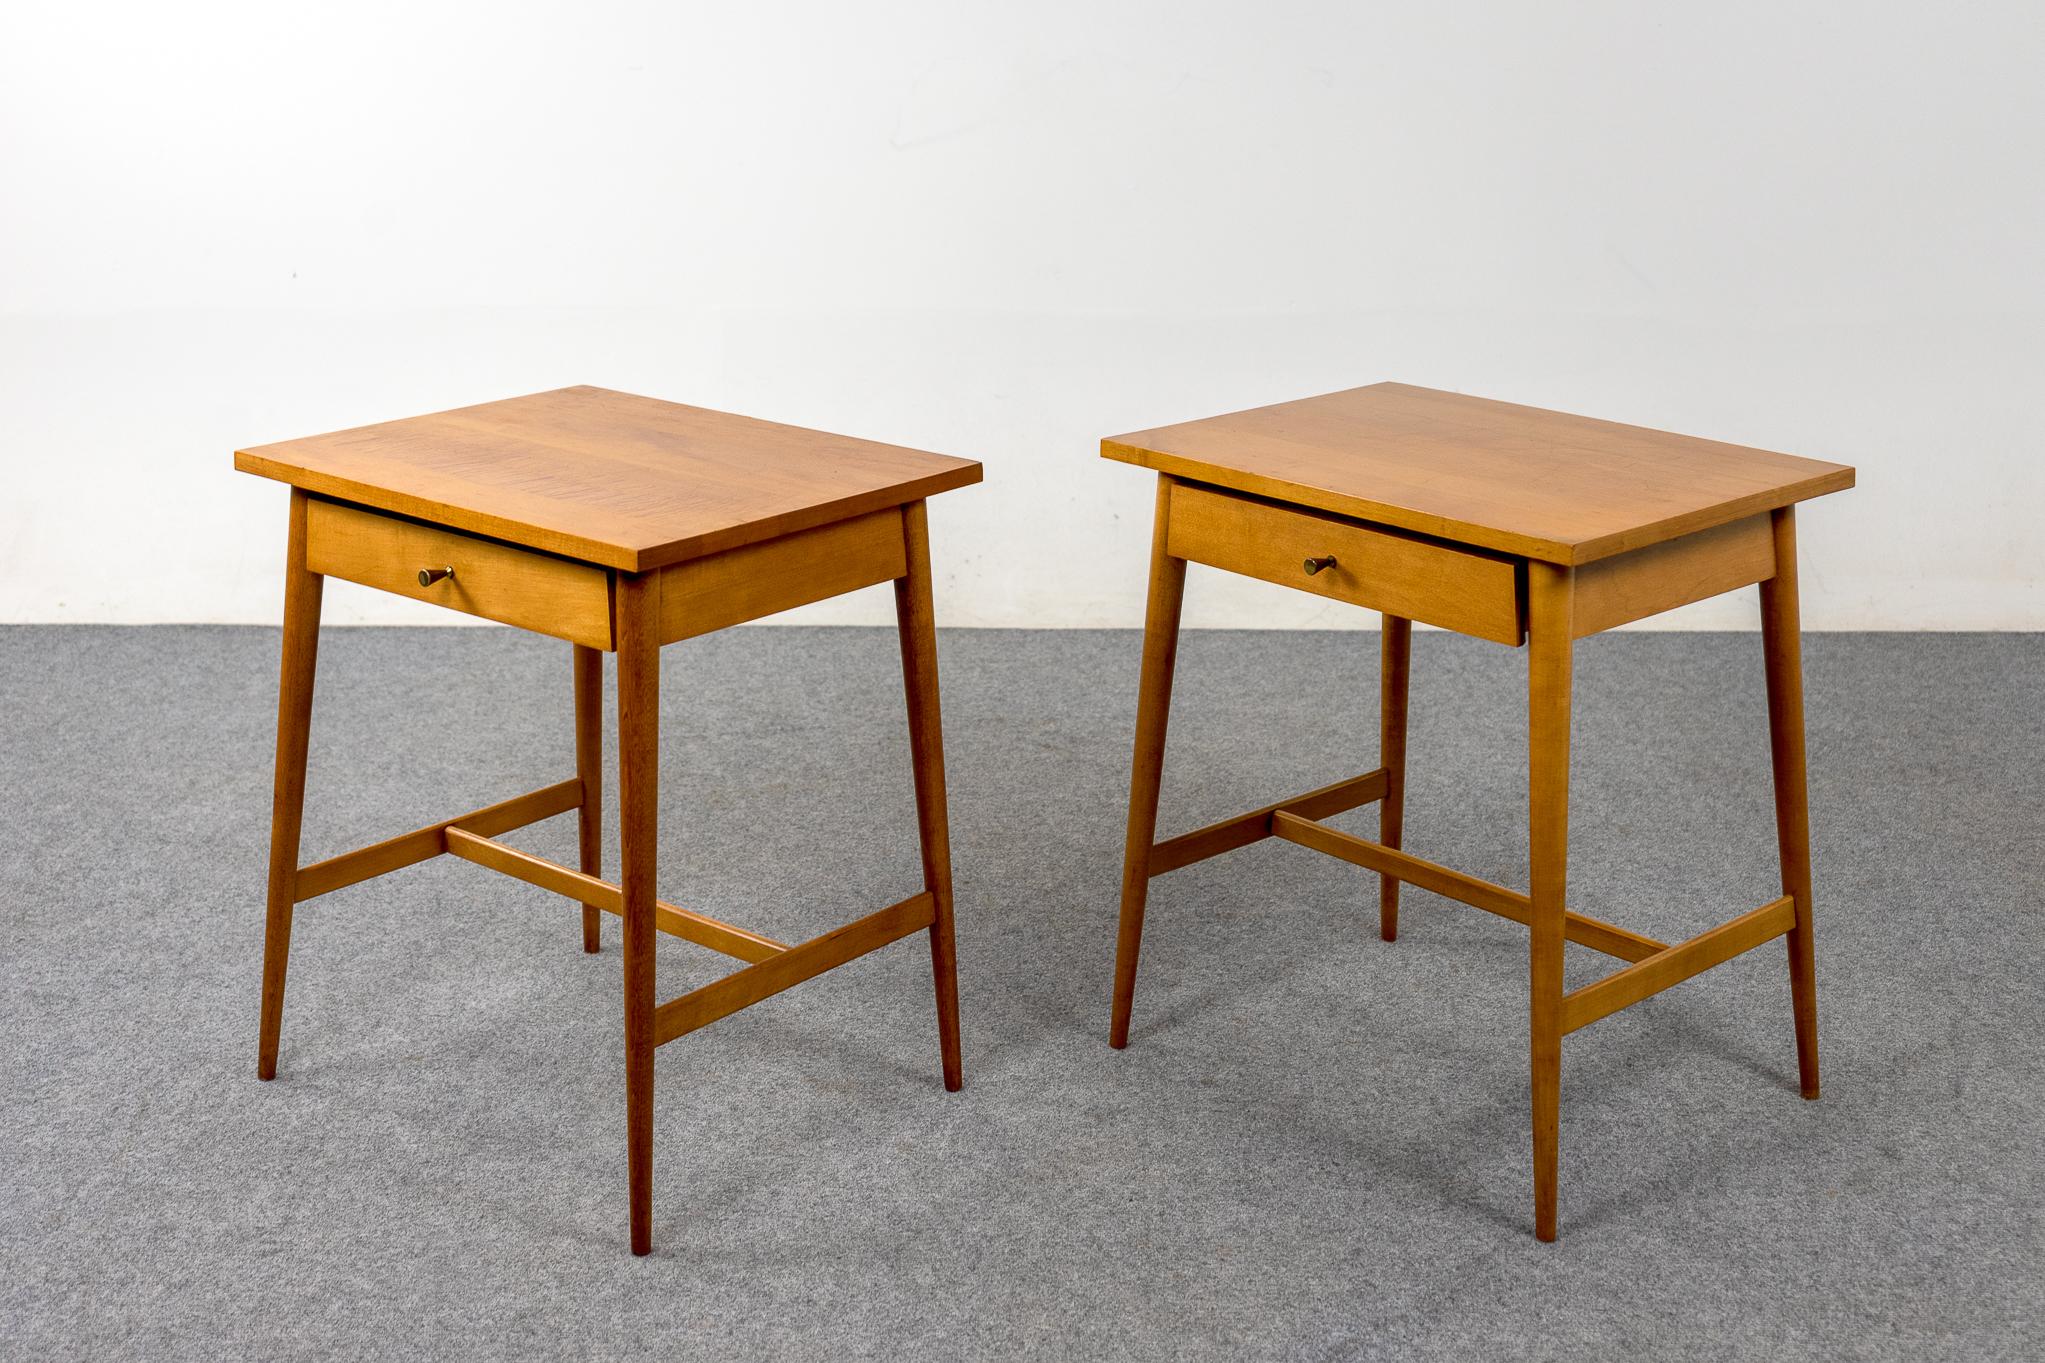 American Maple Bedside Table Pair, by Paul McCobb